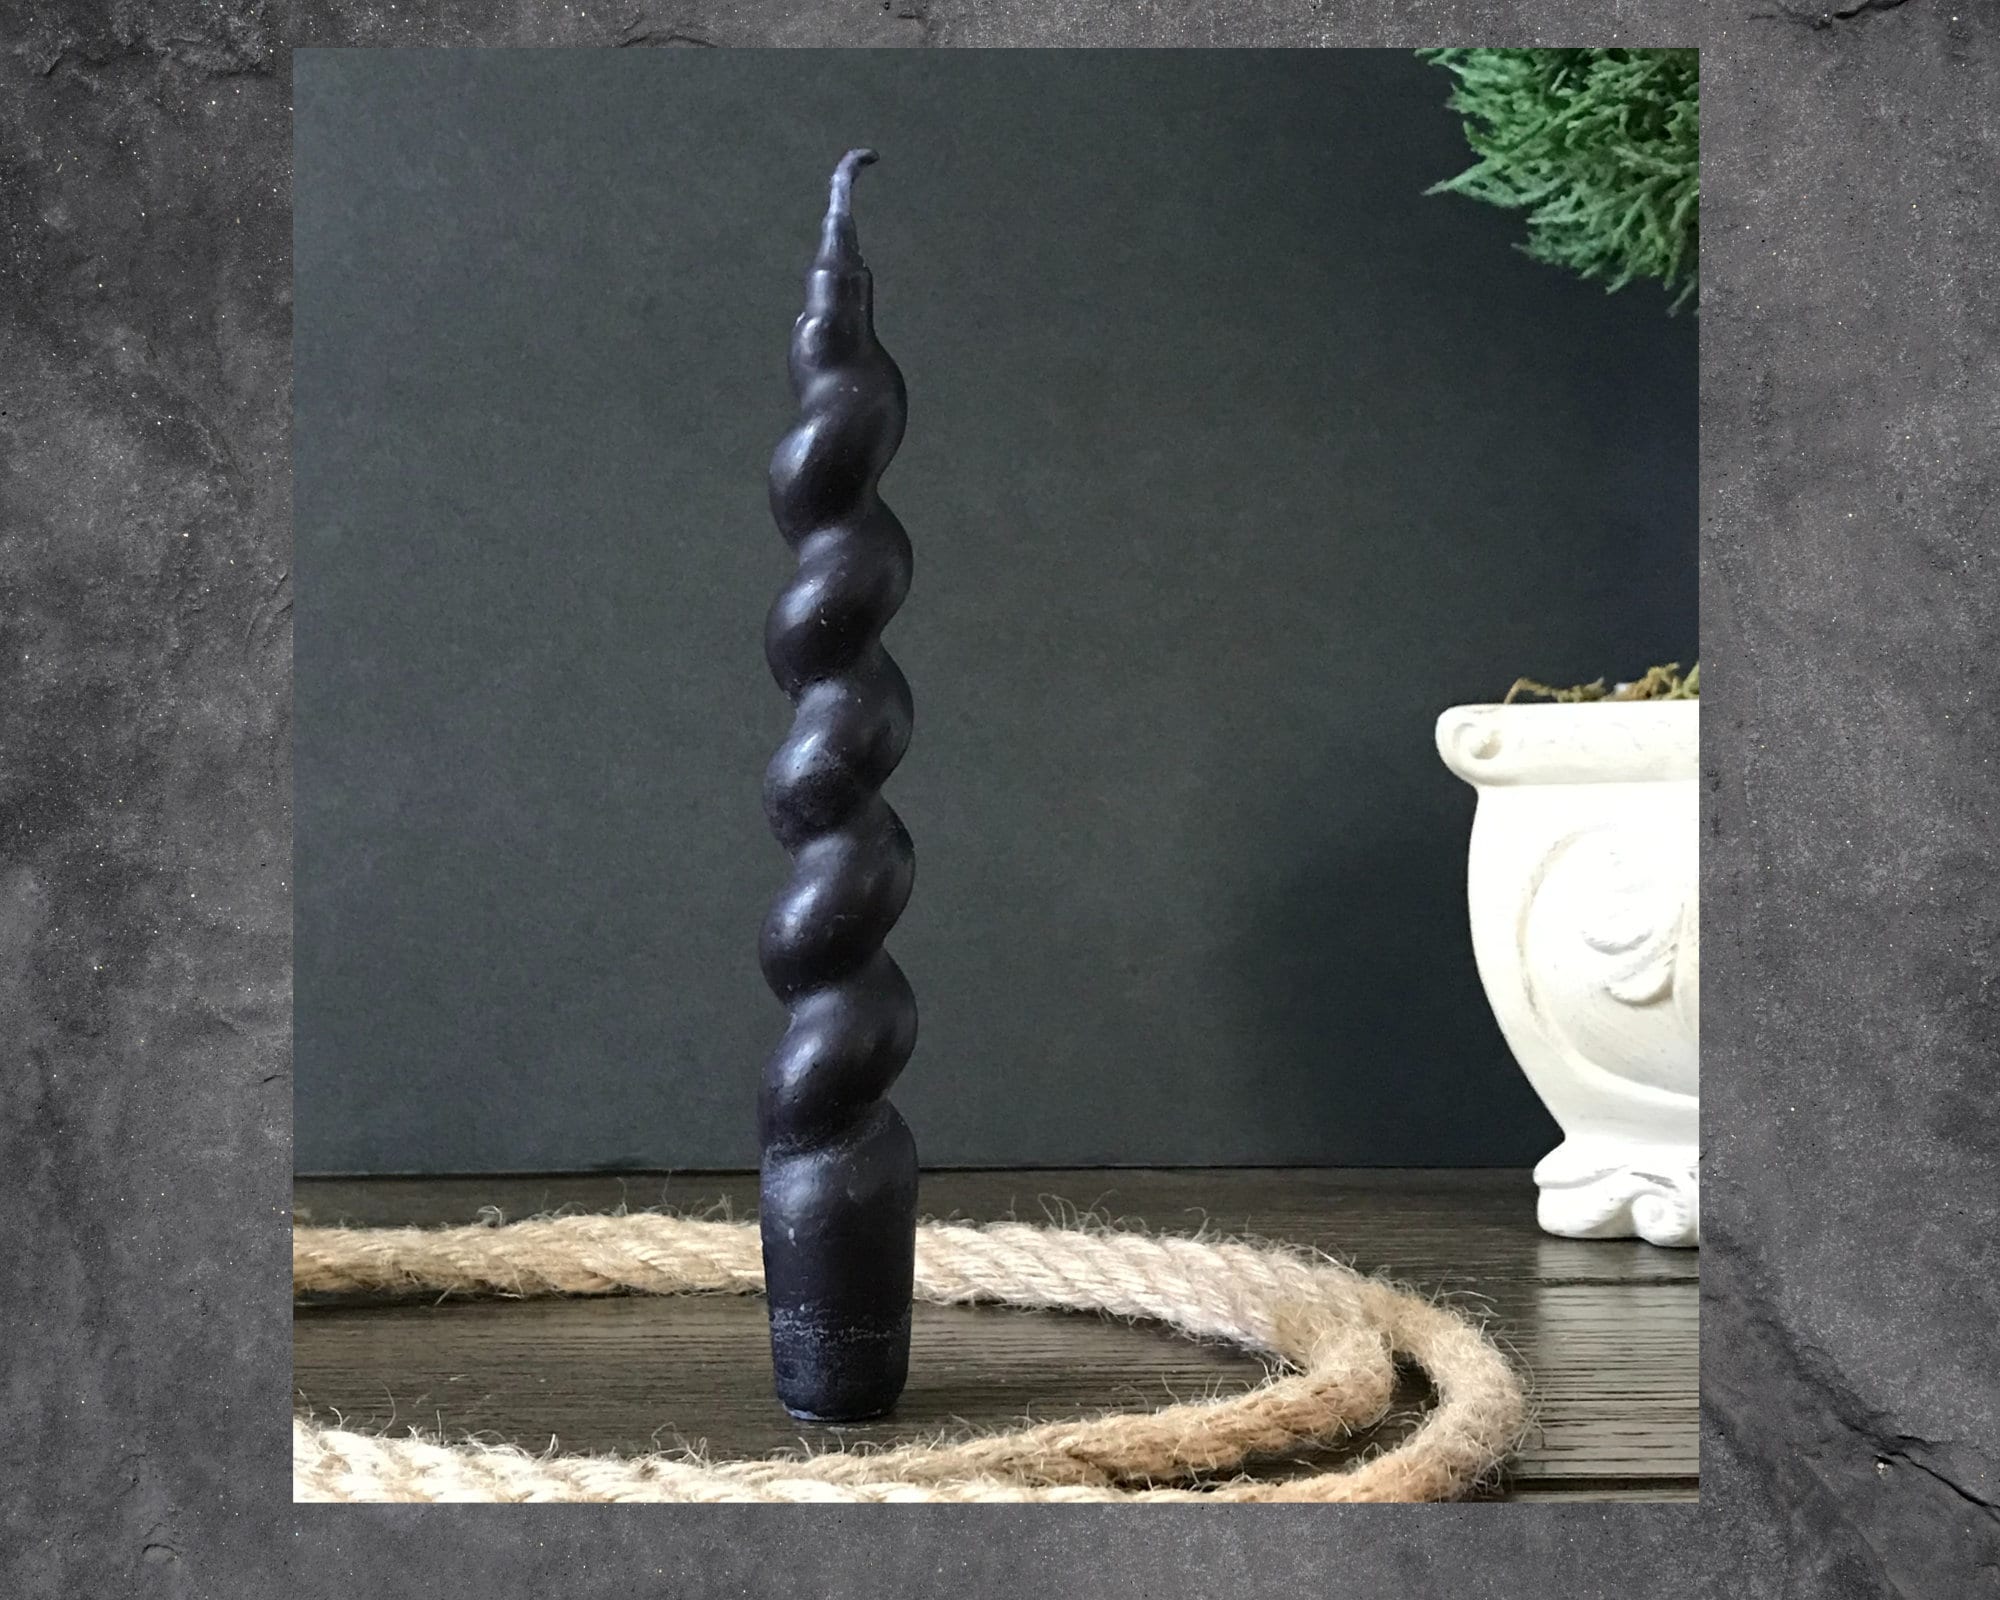 Beeswax Spiral Taper Candles - Natural or Black – Wild Harvest Candle  Company LLC